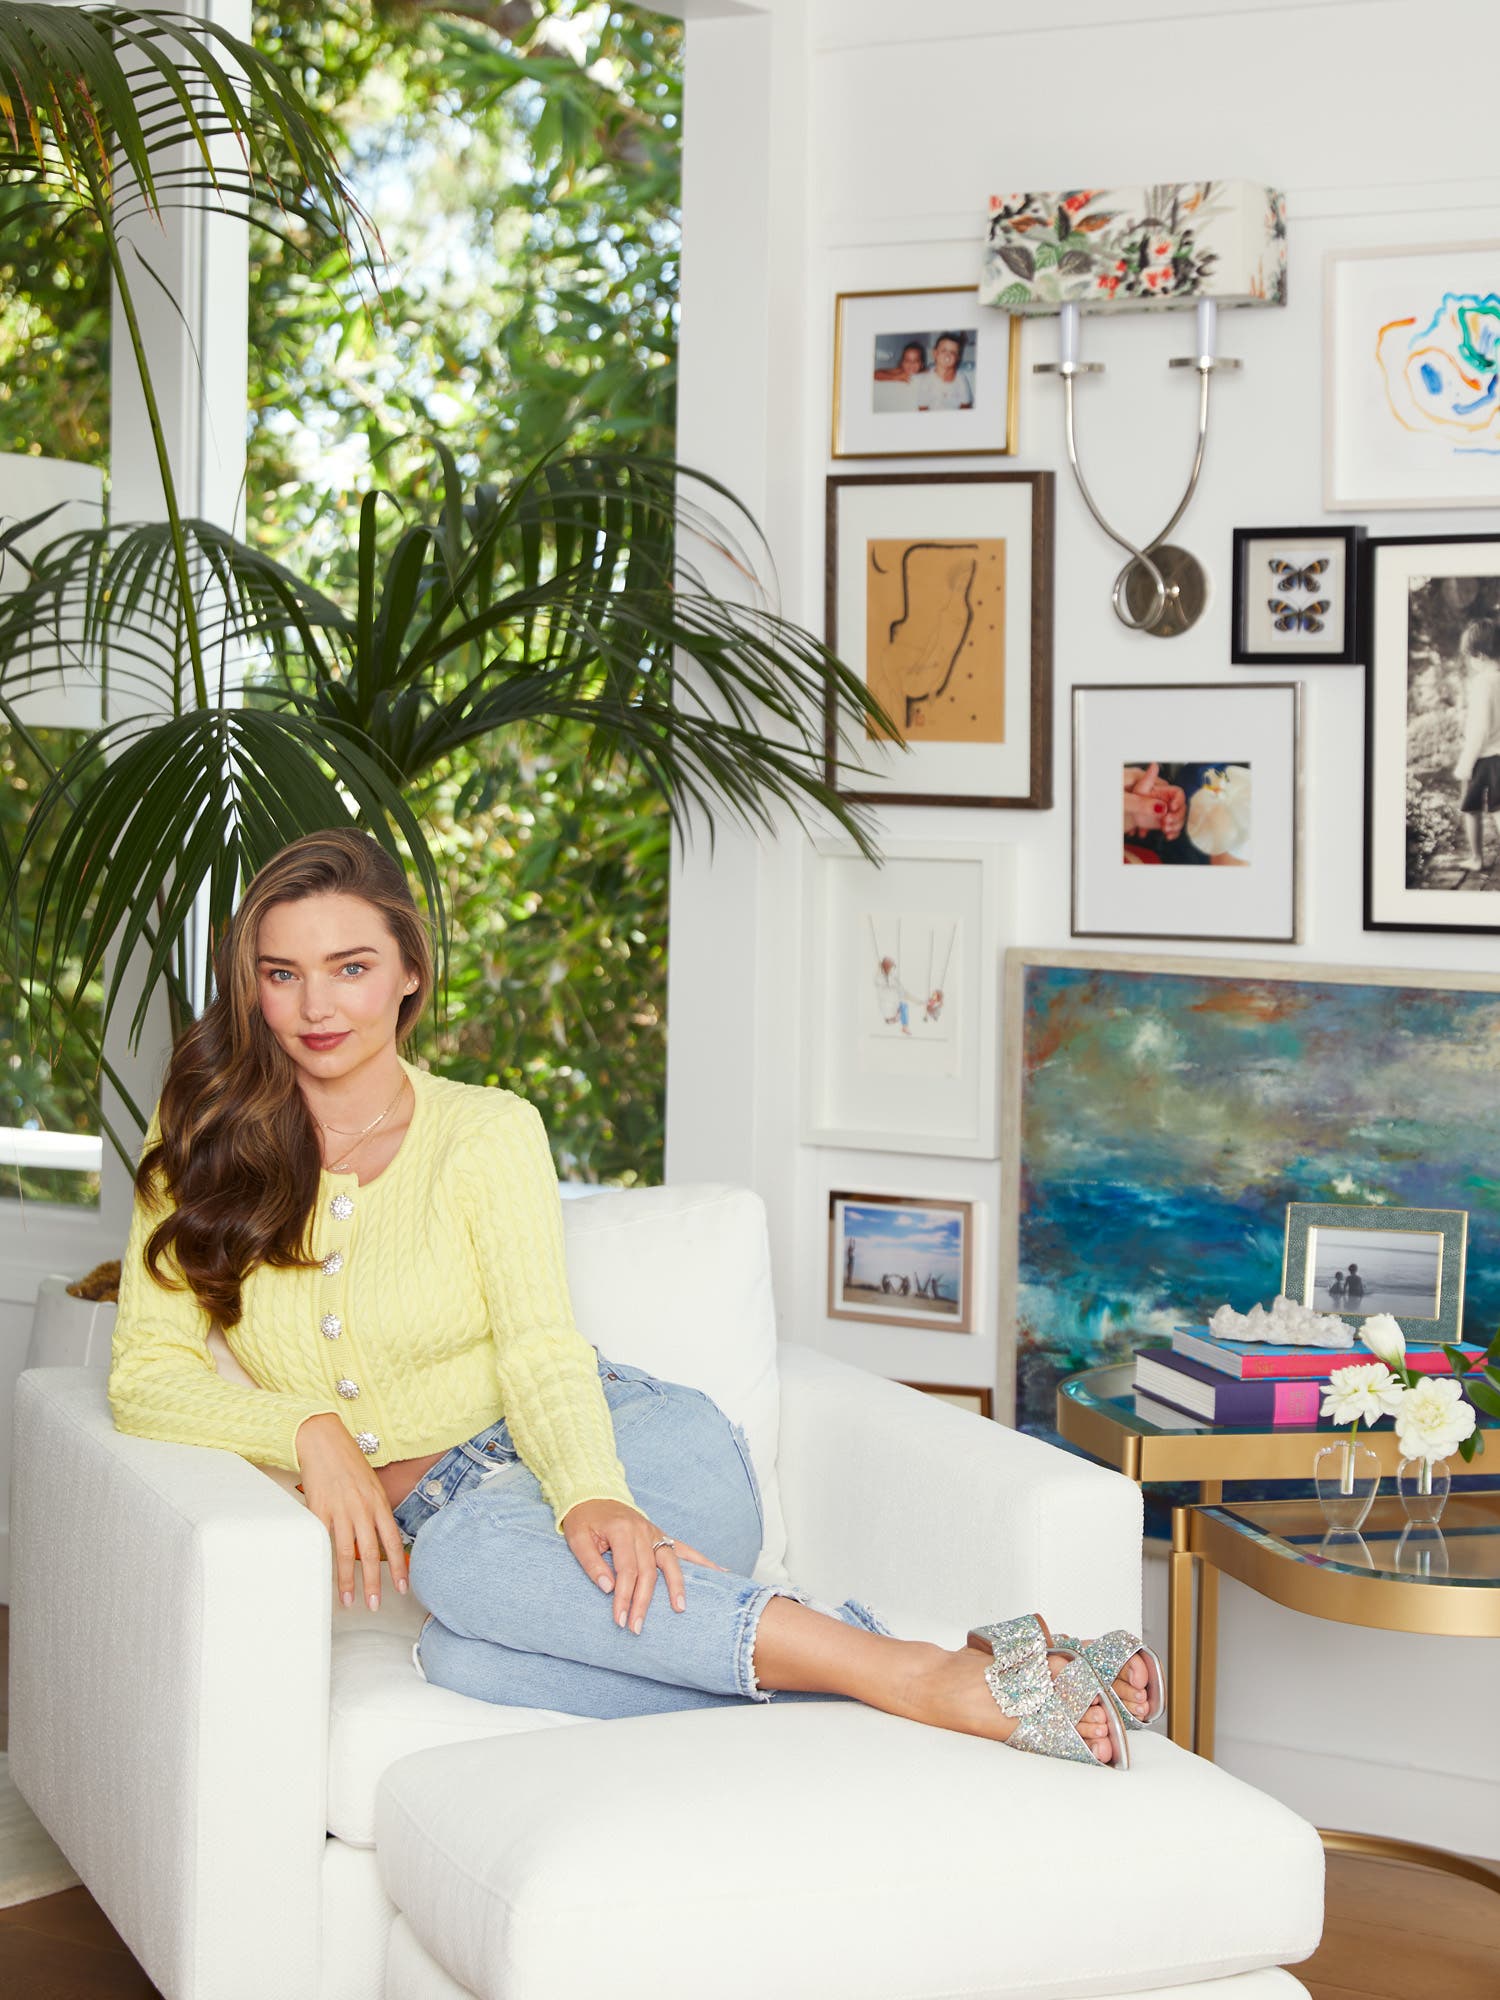 Miranda Kerr’s Furniture Collection Is Inspired by Her Crystal Obsession